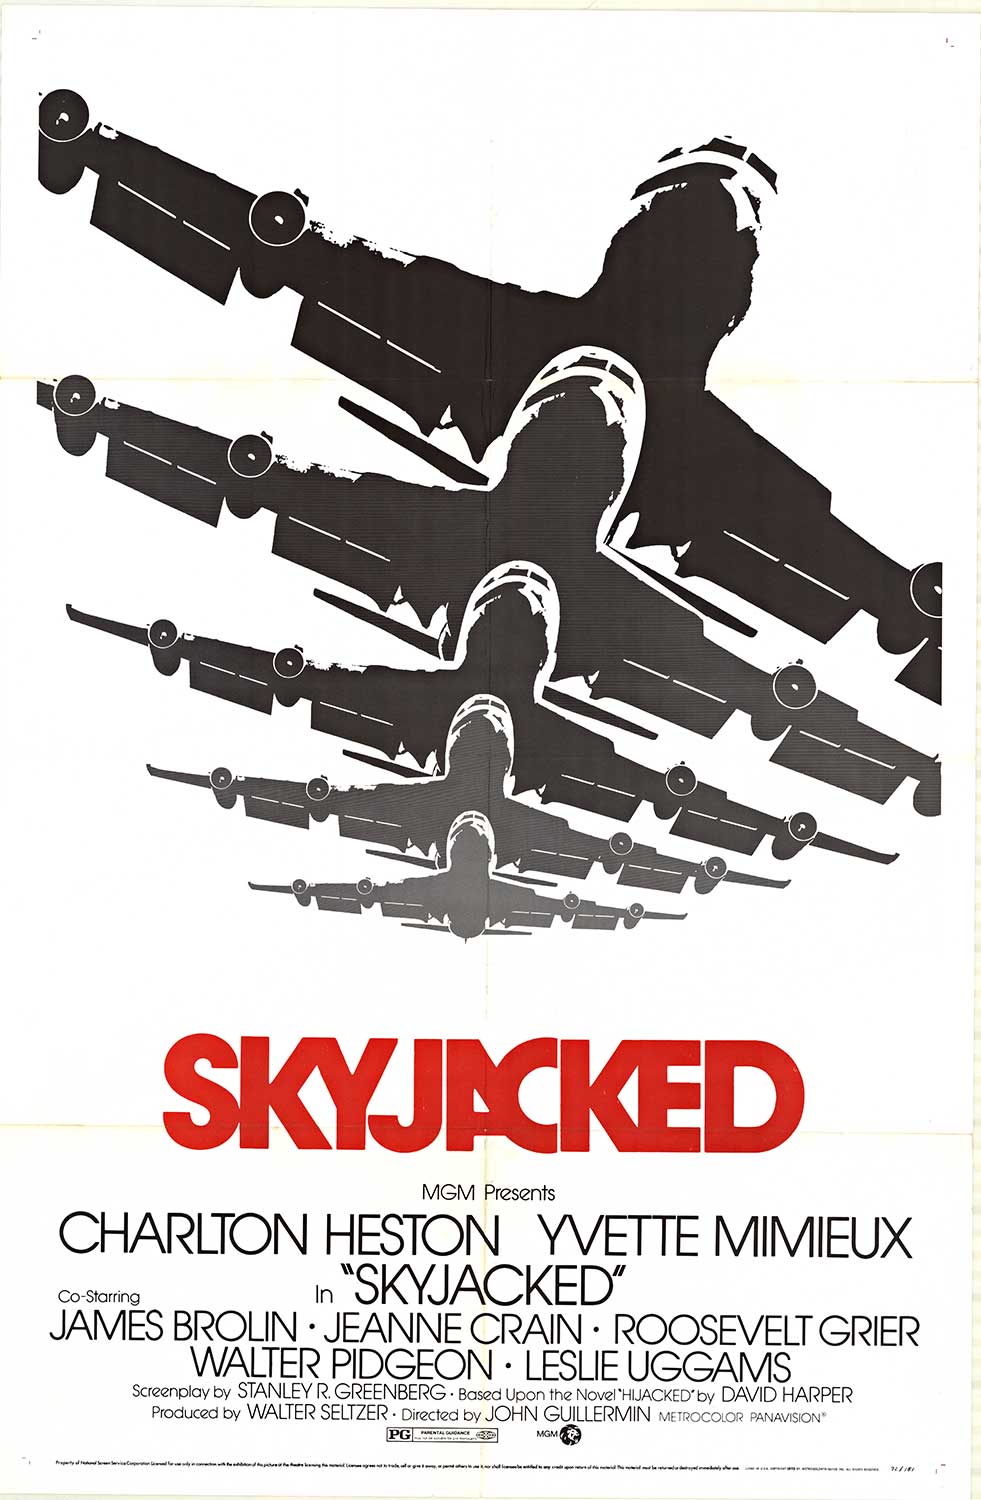 Original “Skyjacked” vintage US 1-sheet movie poster | 1972. NSS: 72/181 <br>Folded <br> <br>Starring Charlton Heston, Yvette Mimieux, James Brolin, Claude Akins, and Jeanne Crain. Directed by John Guillermin. Airplanes